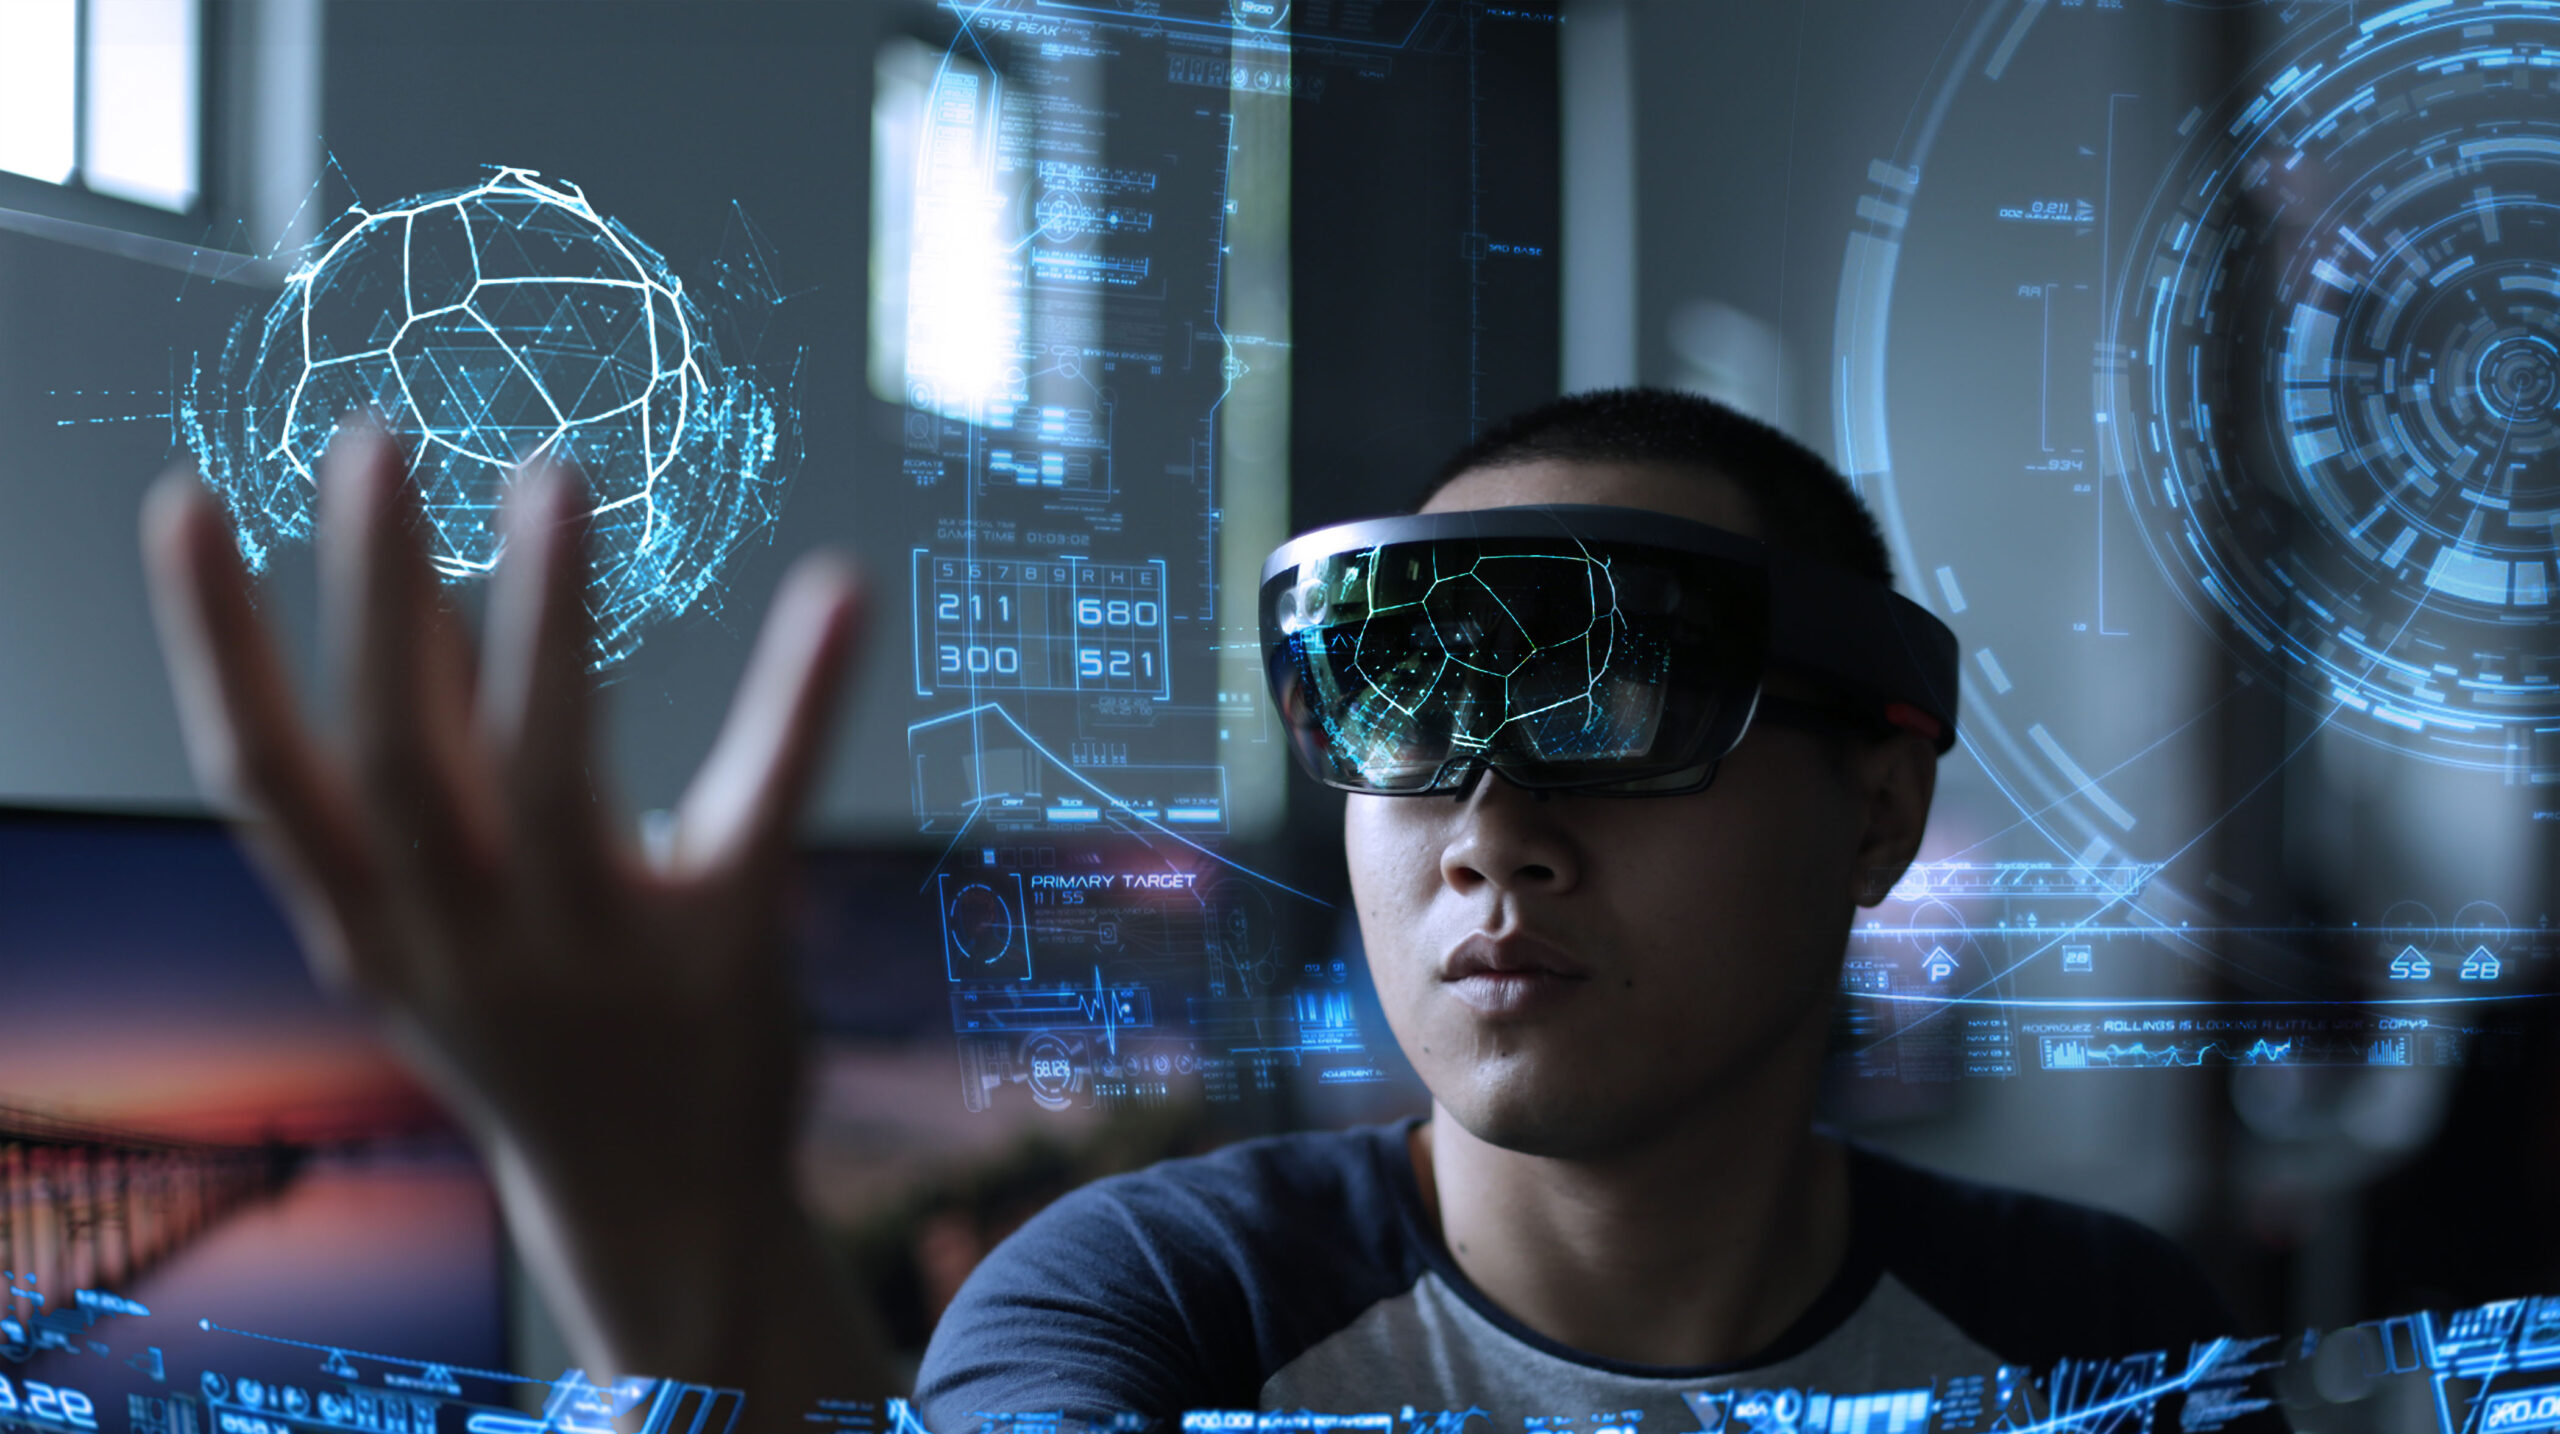 The future of augmented reality